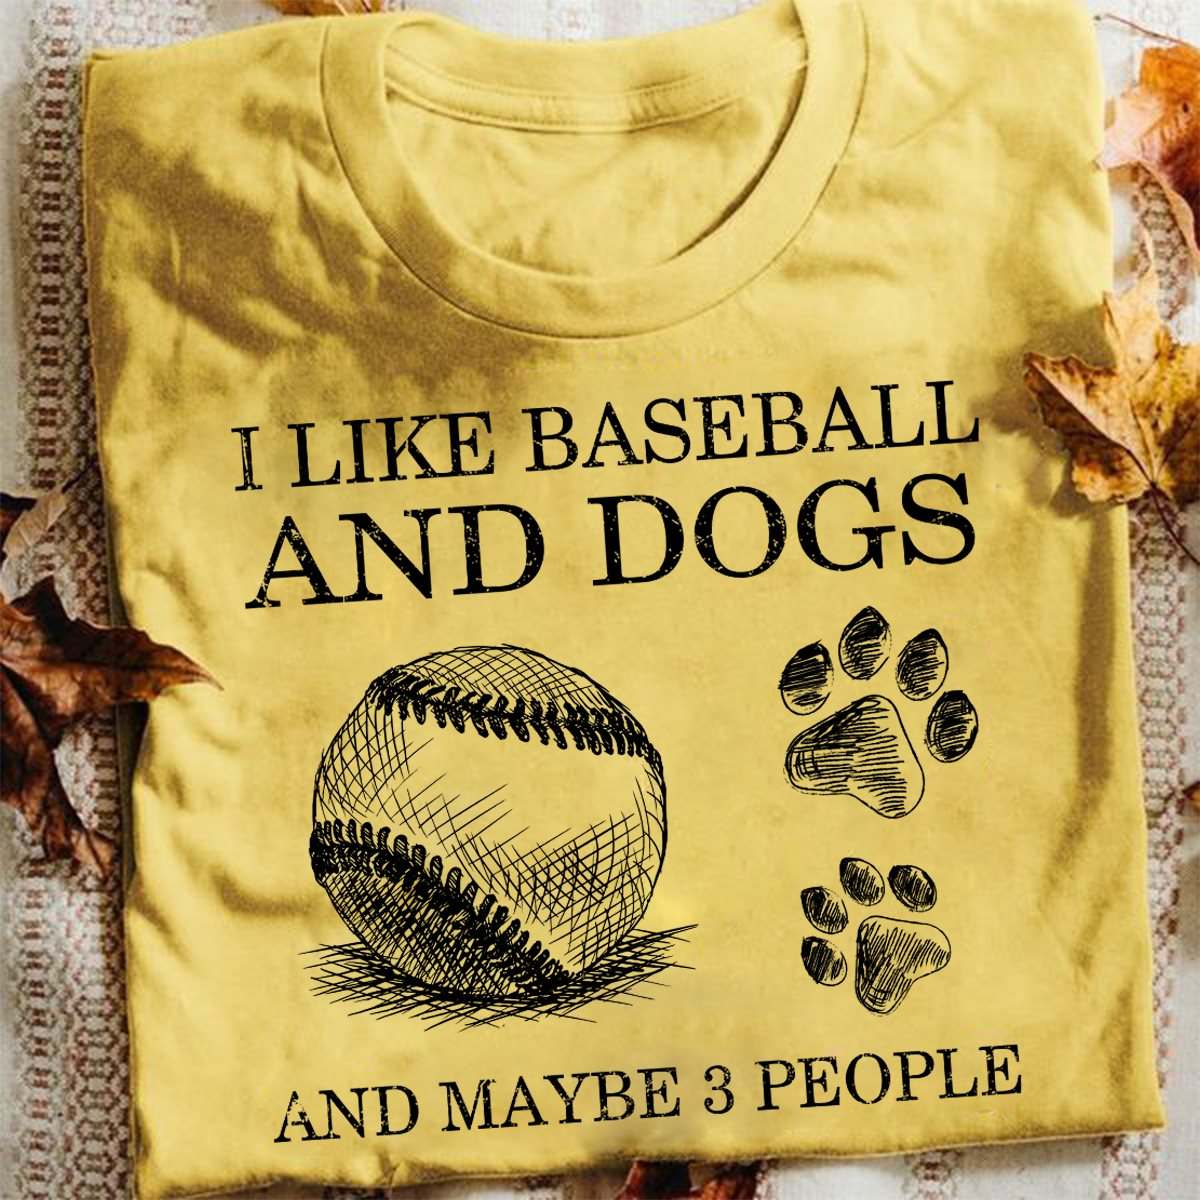 I like baseball and dogs and maybe 3 people - T-shirt for dog lover